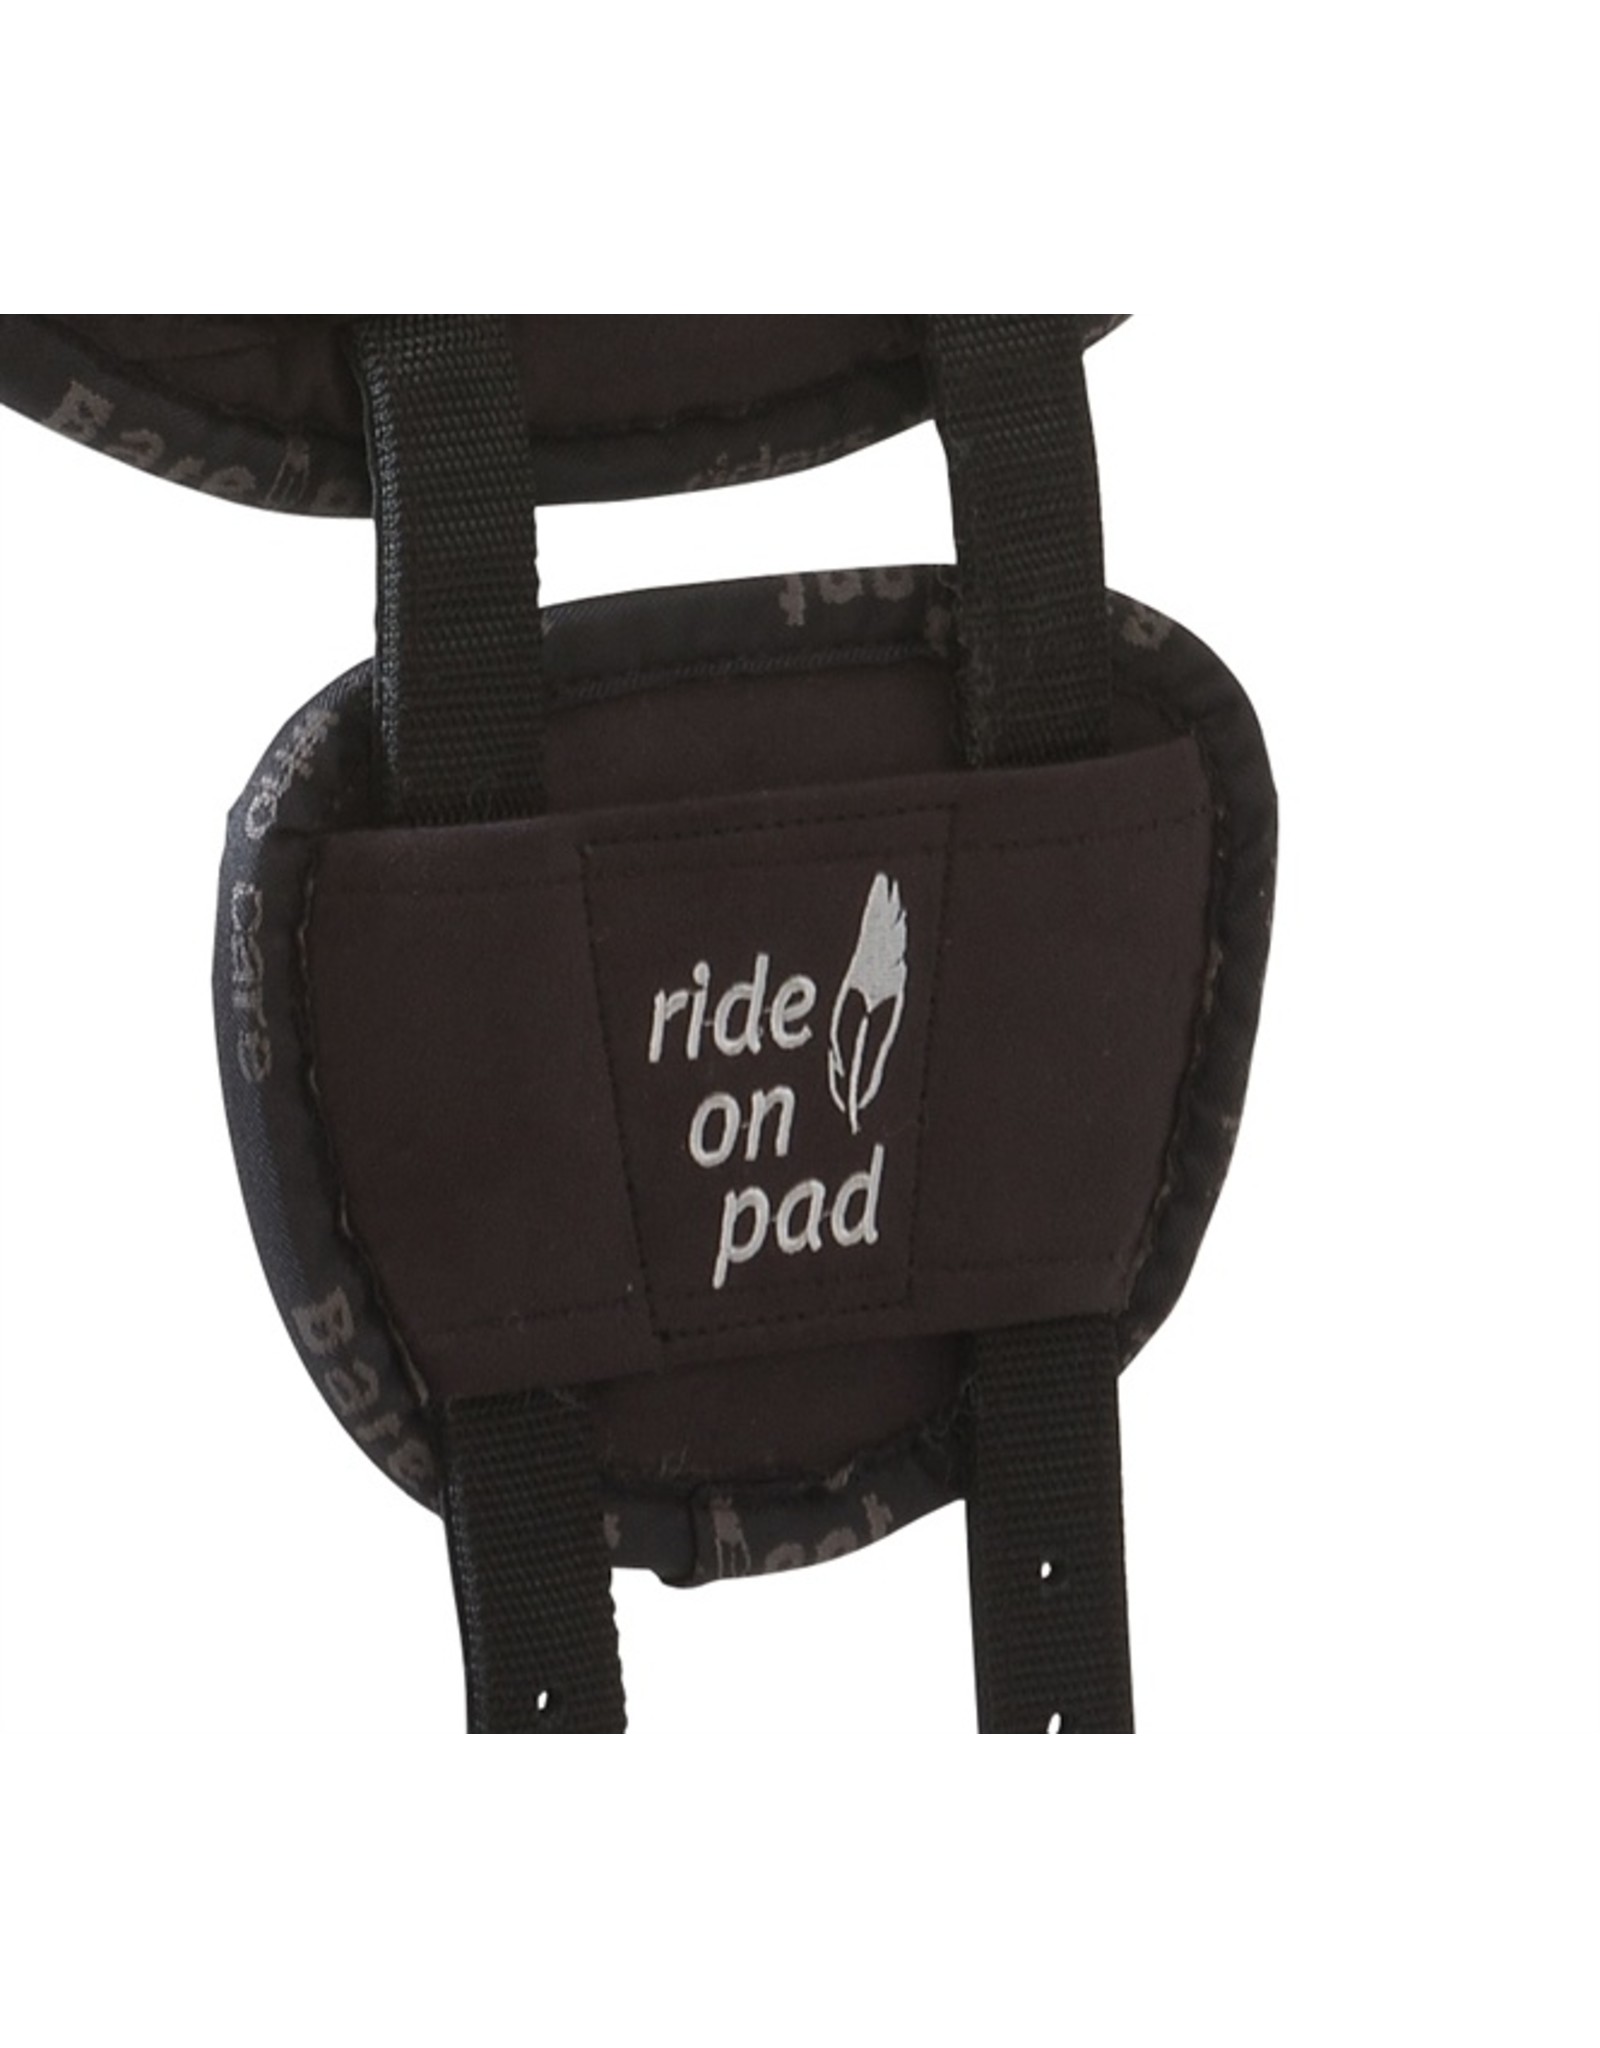 Barefoot Ride on Pad Patches